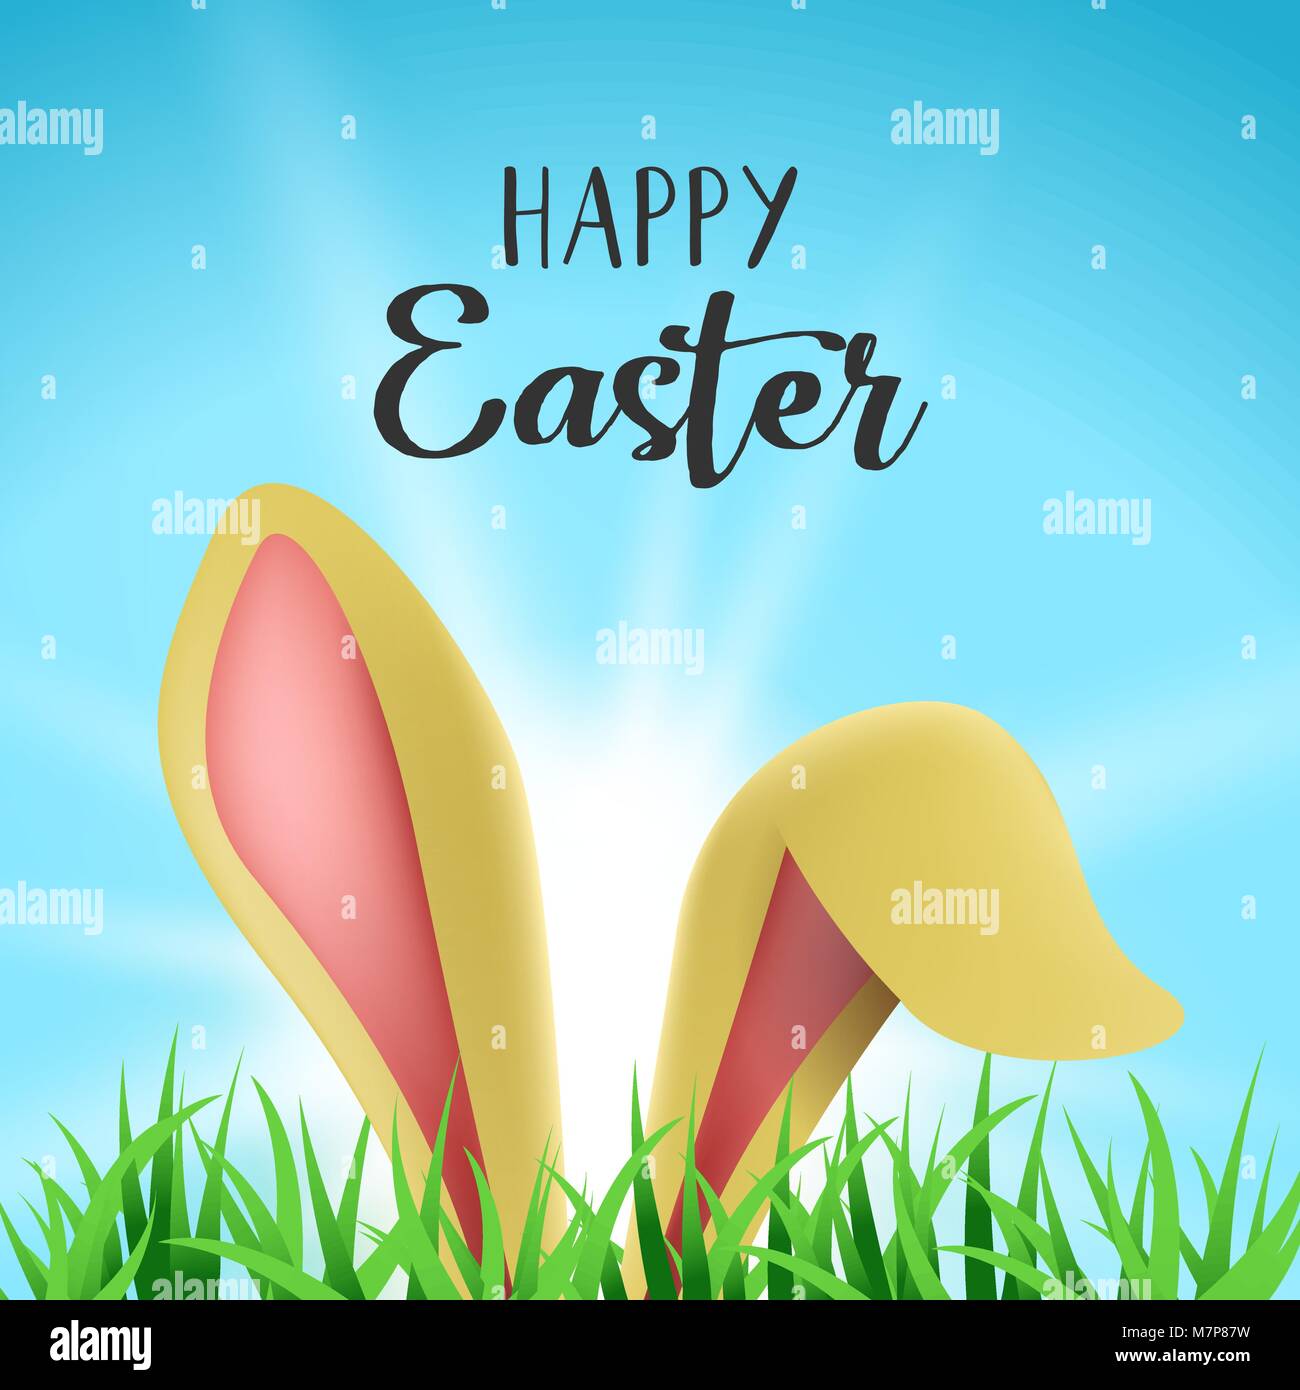 Easter bunny holiday greeting card illustration, rabbit ears hiding behind garden grass with happy celebration message. EPS10 vector. Stock Vector